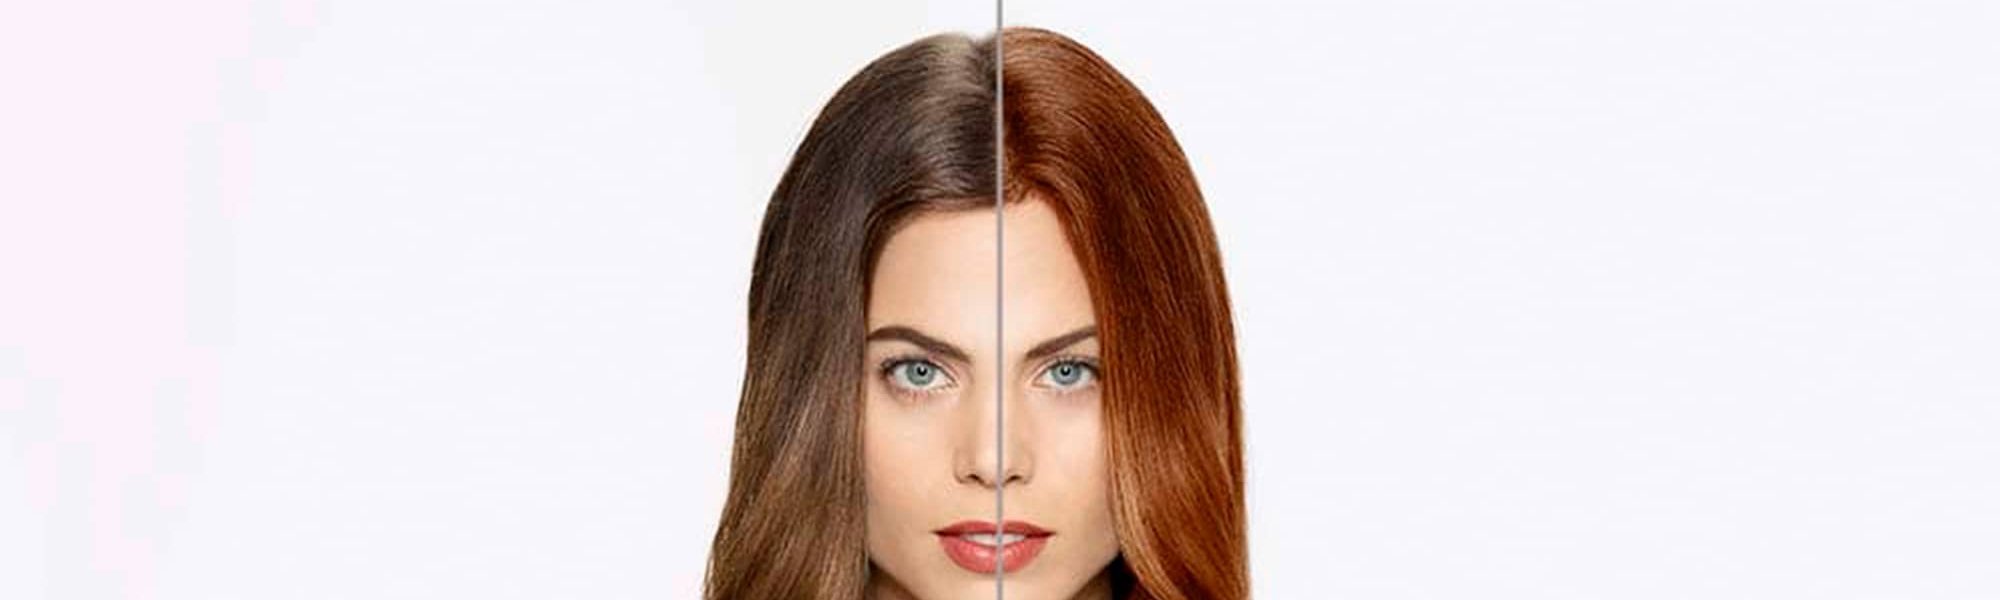 Look This Virtual Hair Color App Lets You Try On Different Hair Dyes   Copy